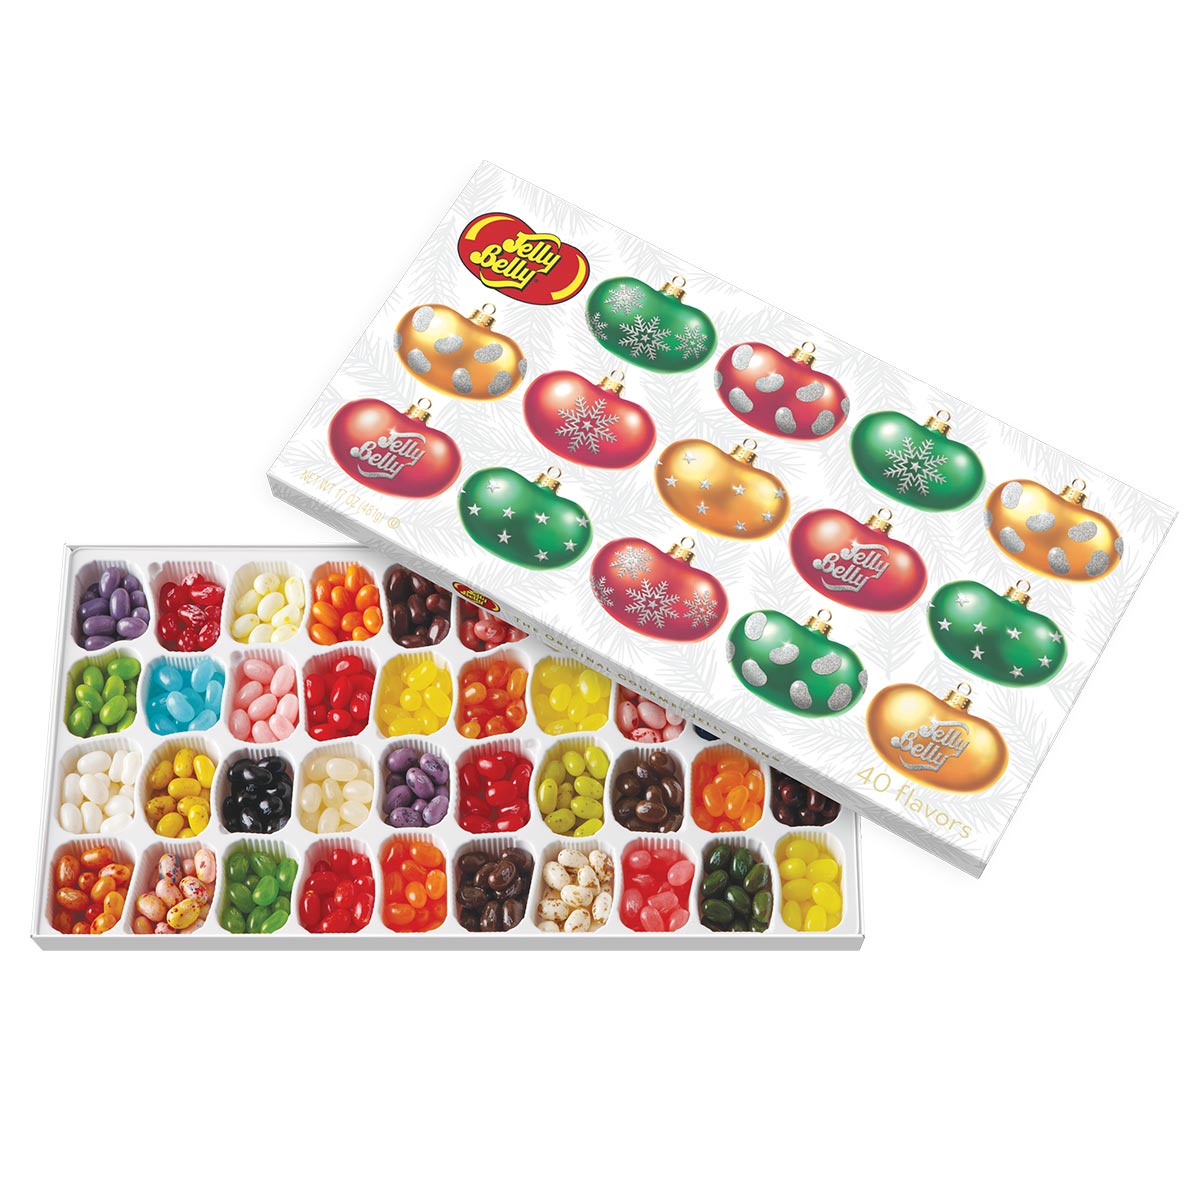 Jelly Belly 40-Flavor Christmas Gift Box, 17oz